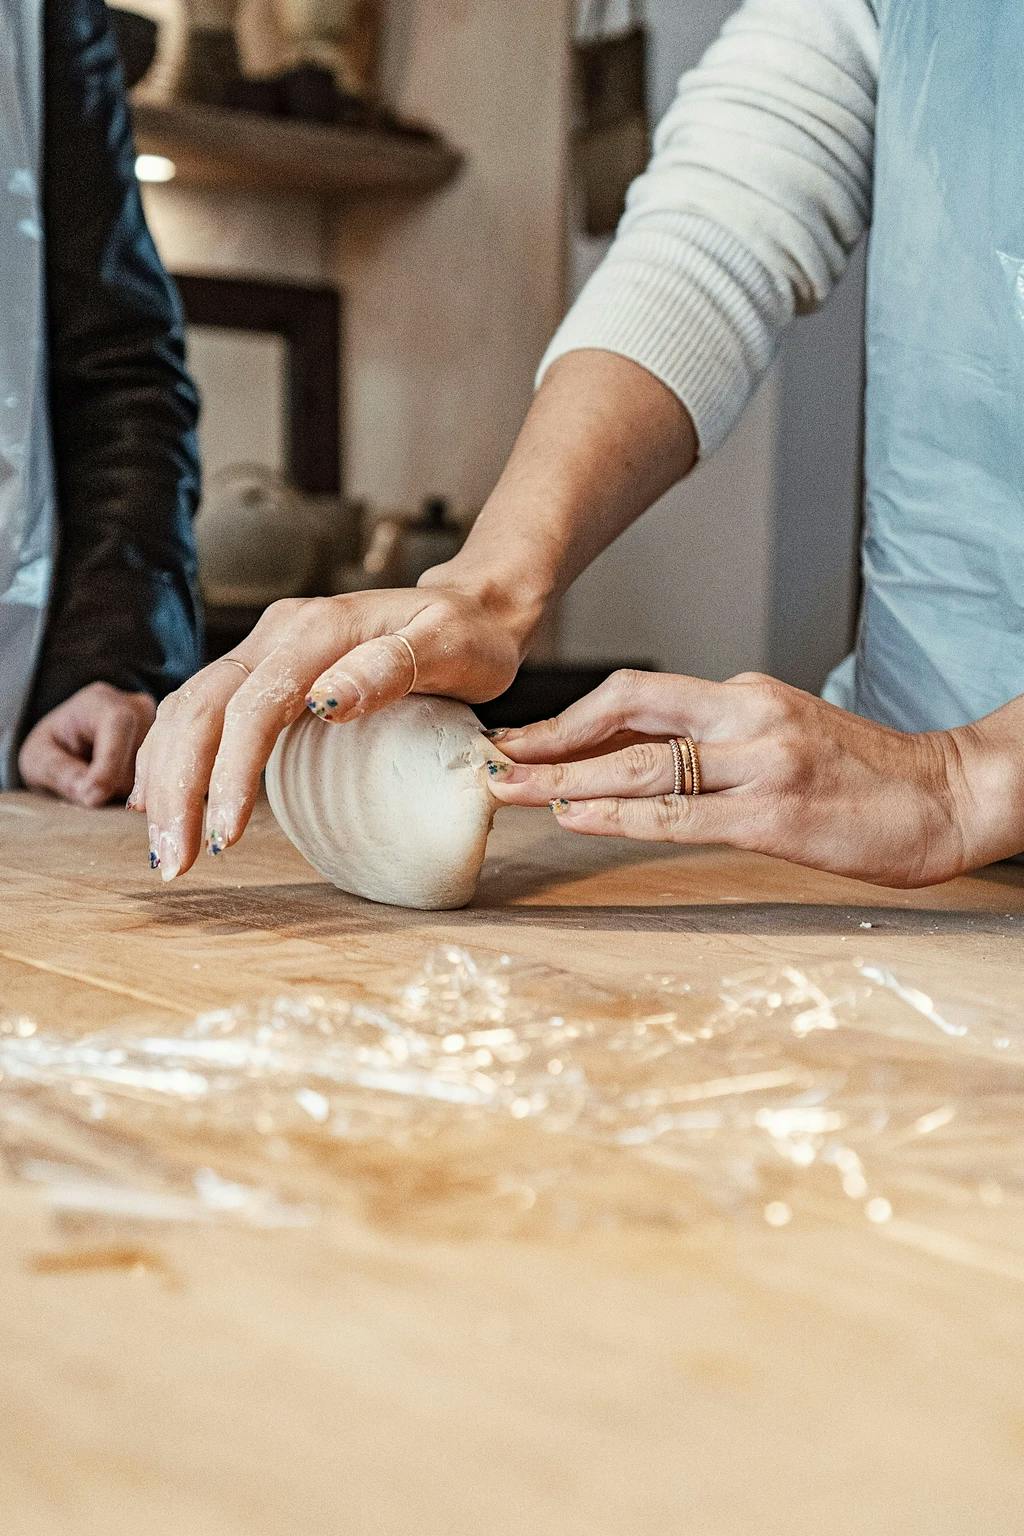 a close up of someone hand rolling dough